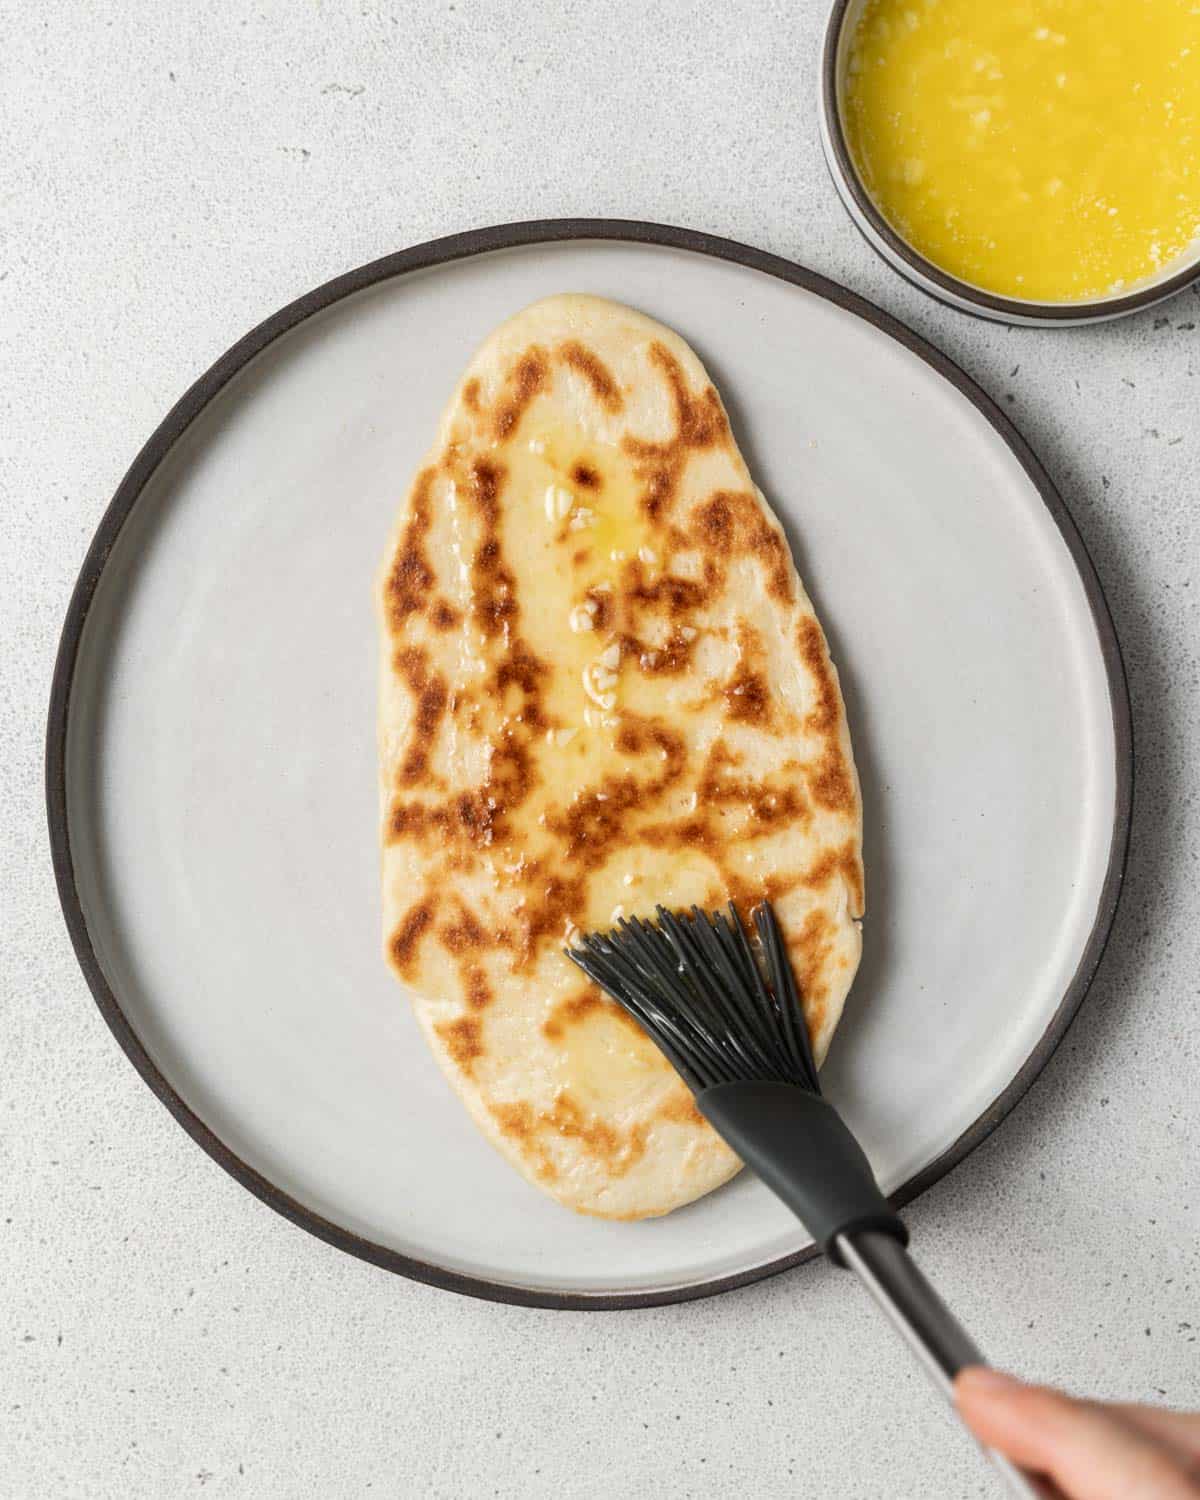 Brushing naan with melted butter.